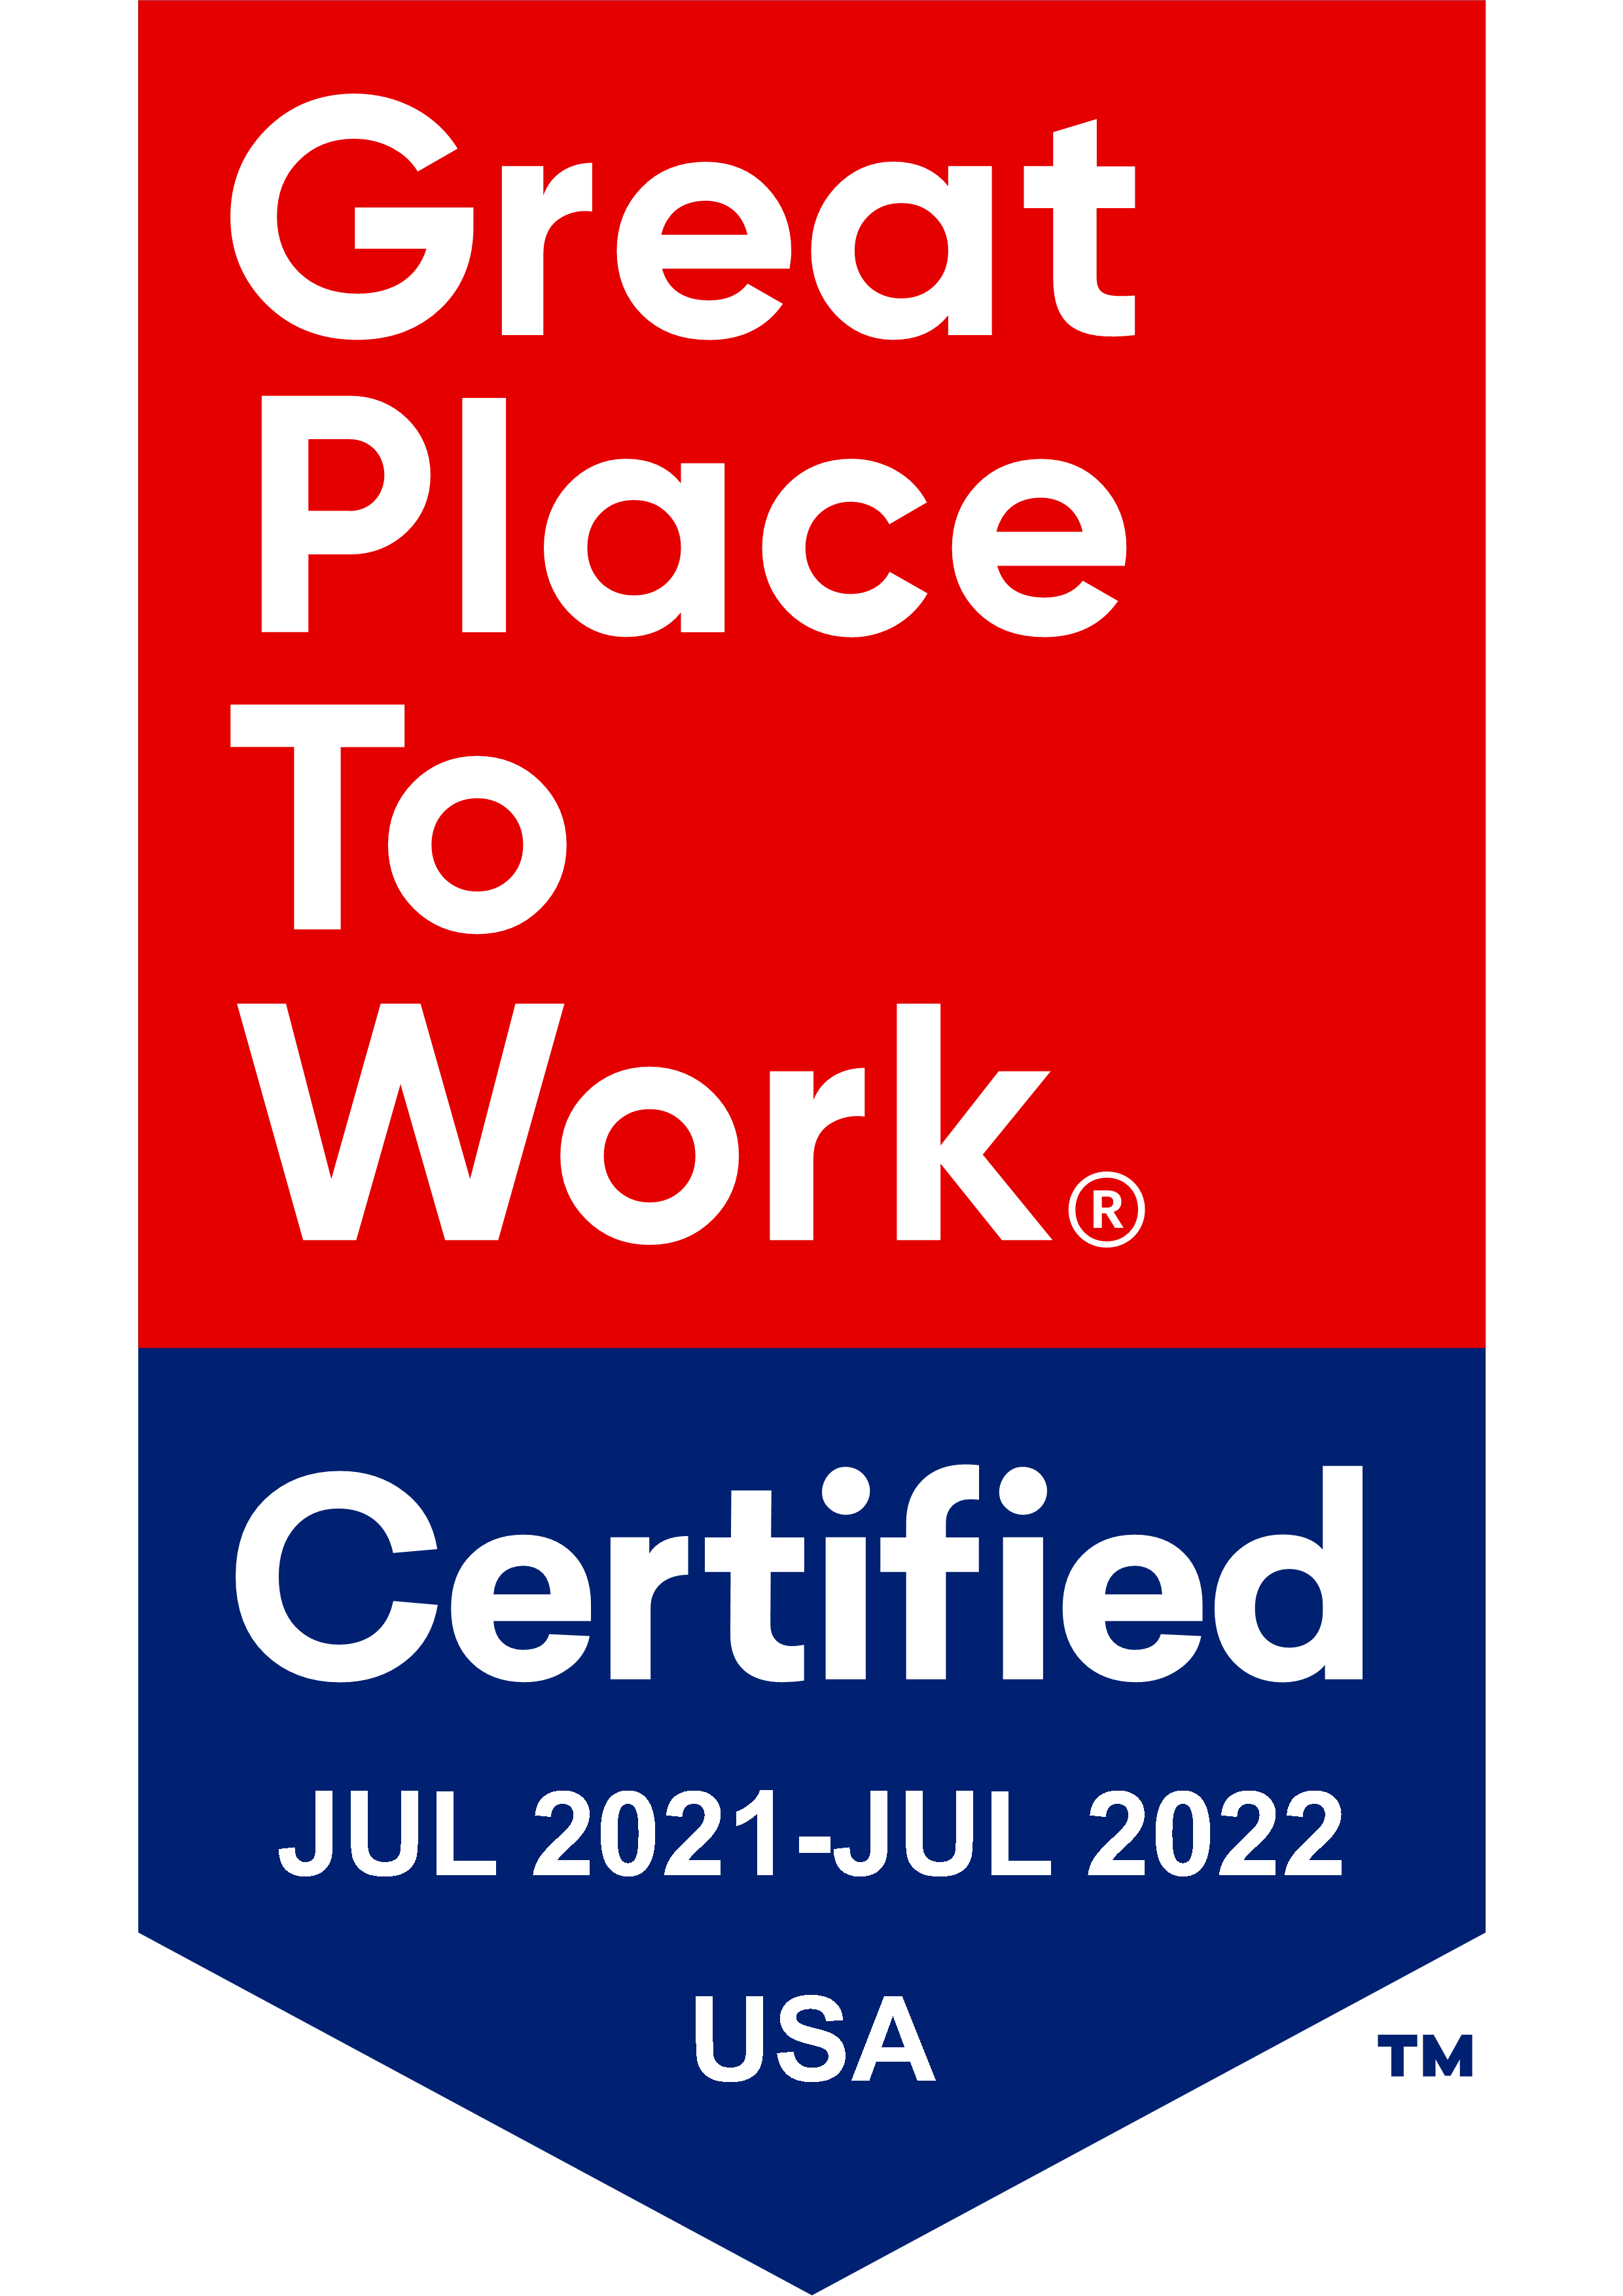 Great Place to Work - Certified Company